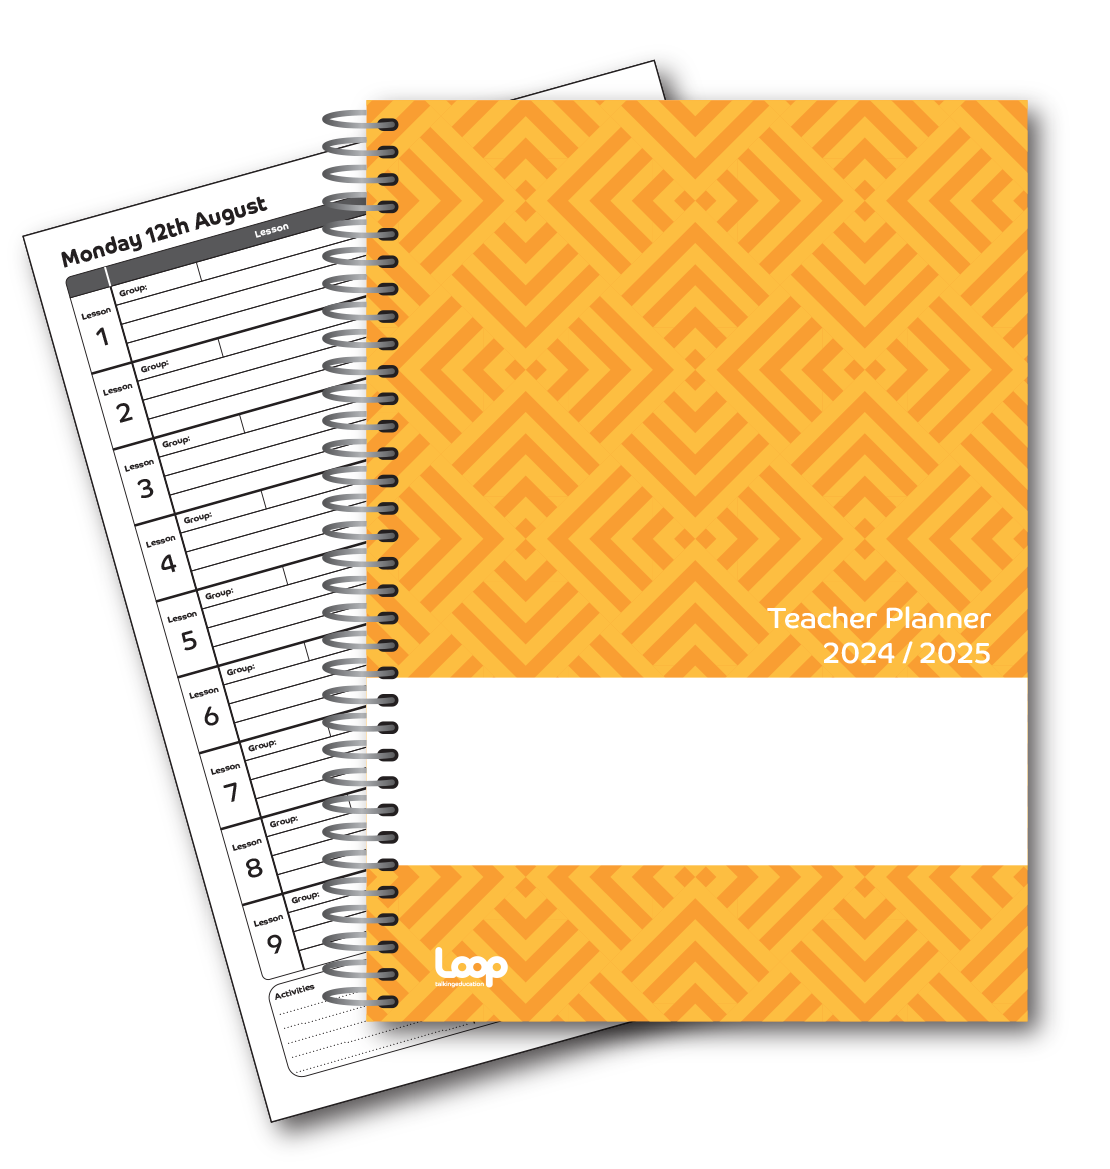 9 Lesson Dated Teacher Planner A4 size